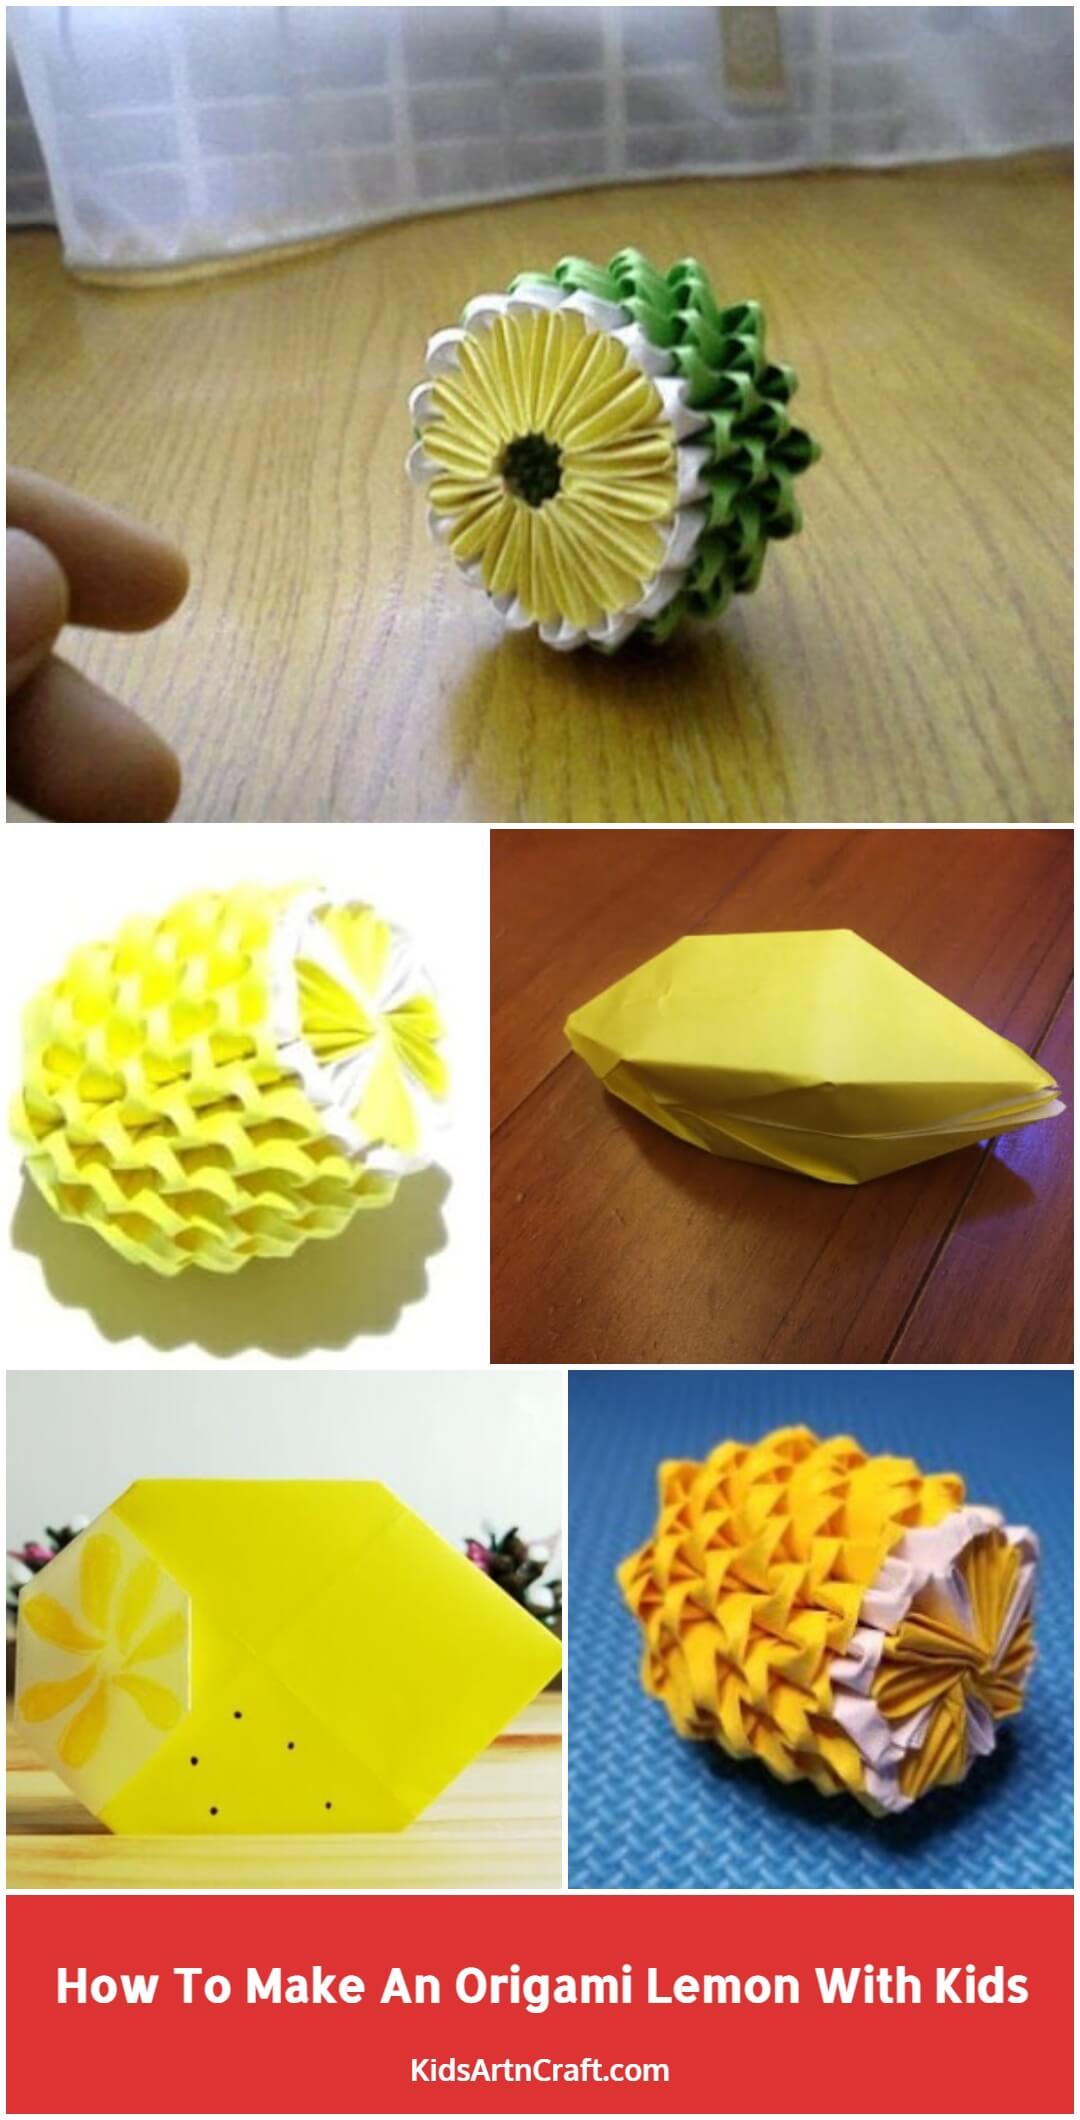 How To Make An Origami Lemon With Kids